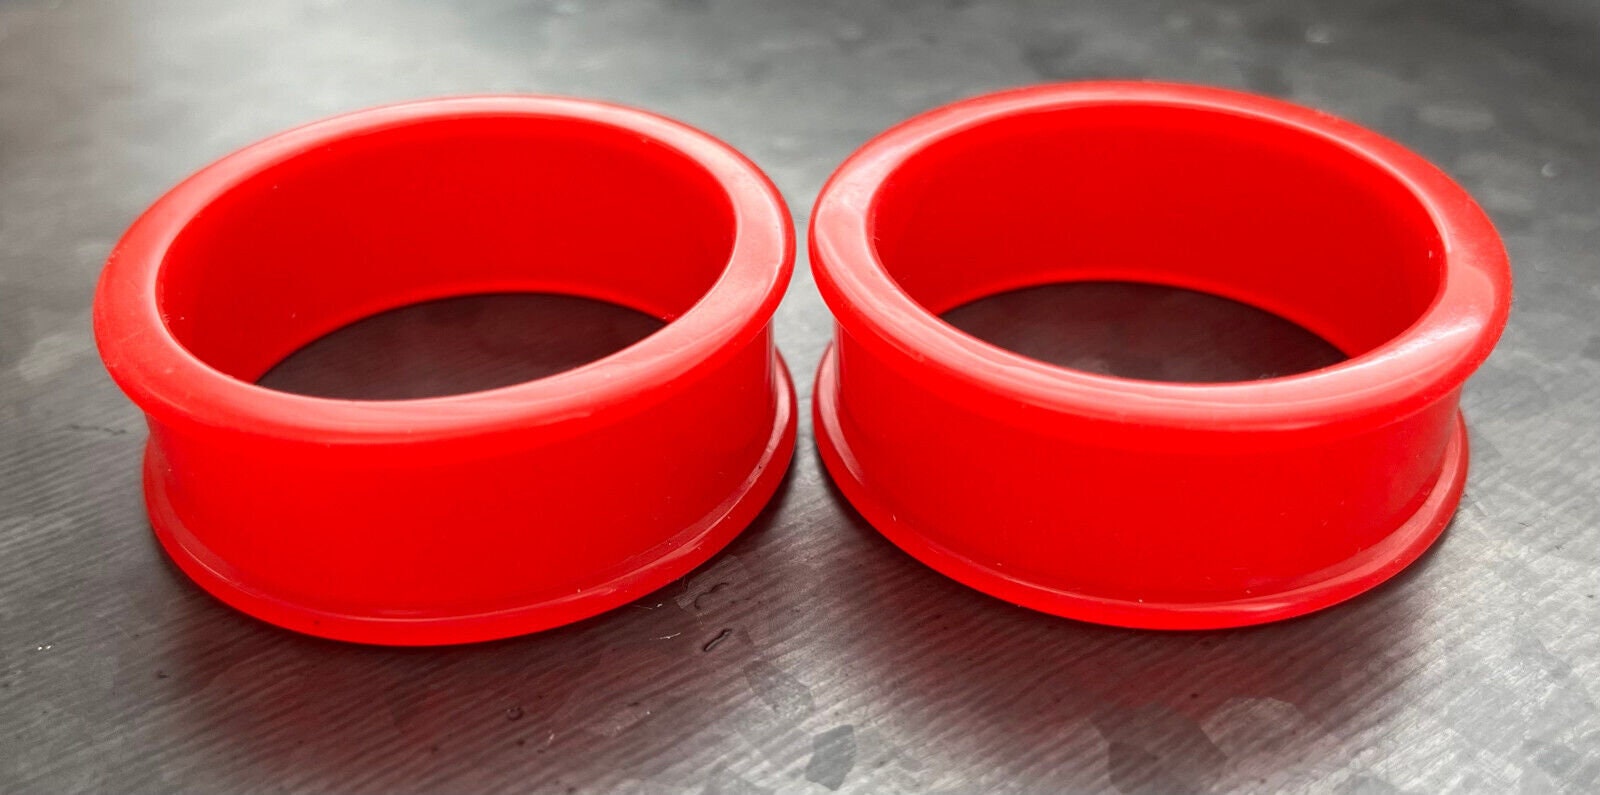 PAIR of Unique Red Silicone Double Flare Tunnels - Gauges 2g (6mm) up to 2" (51mm) available!